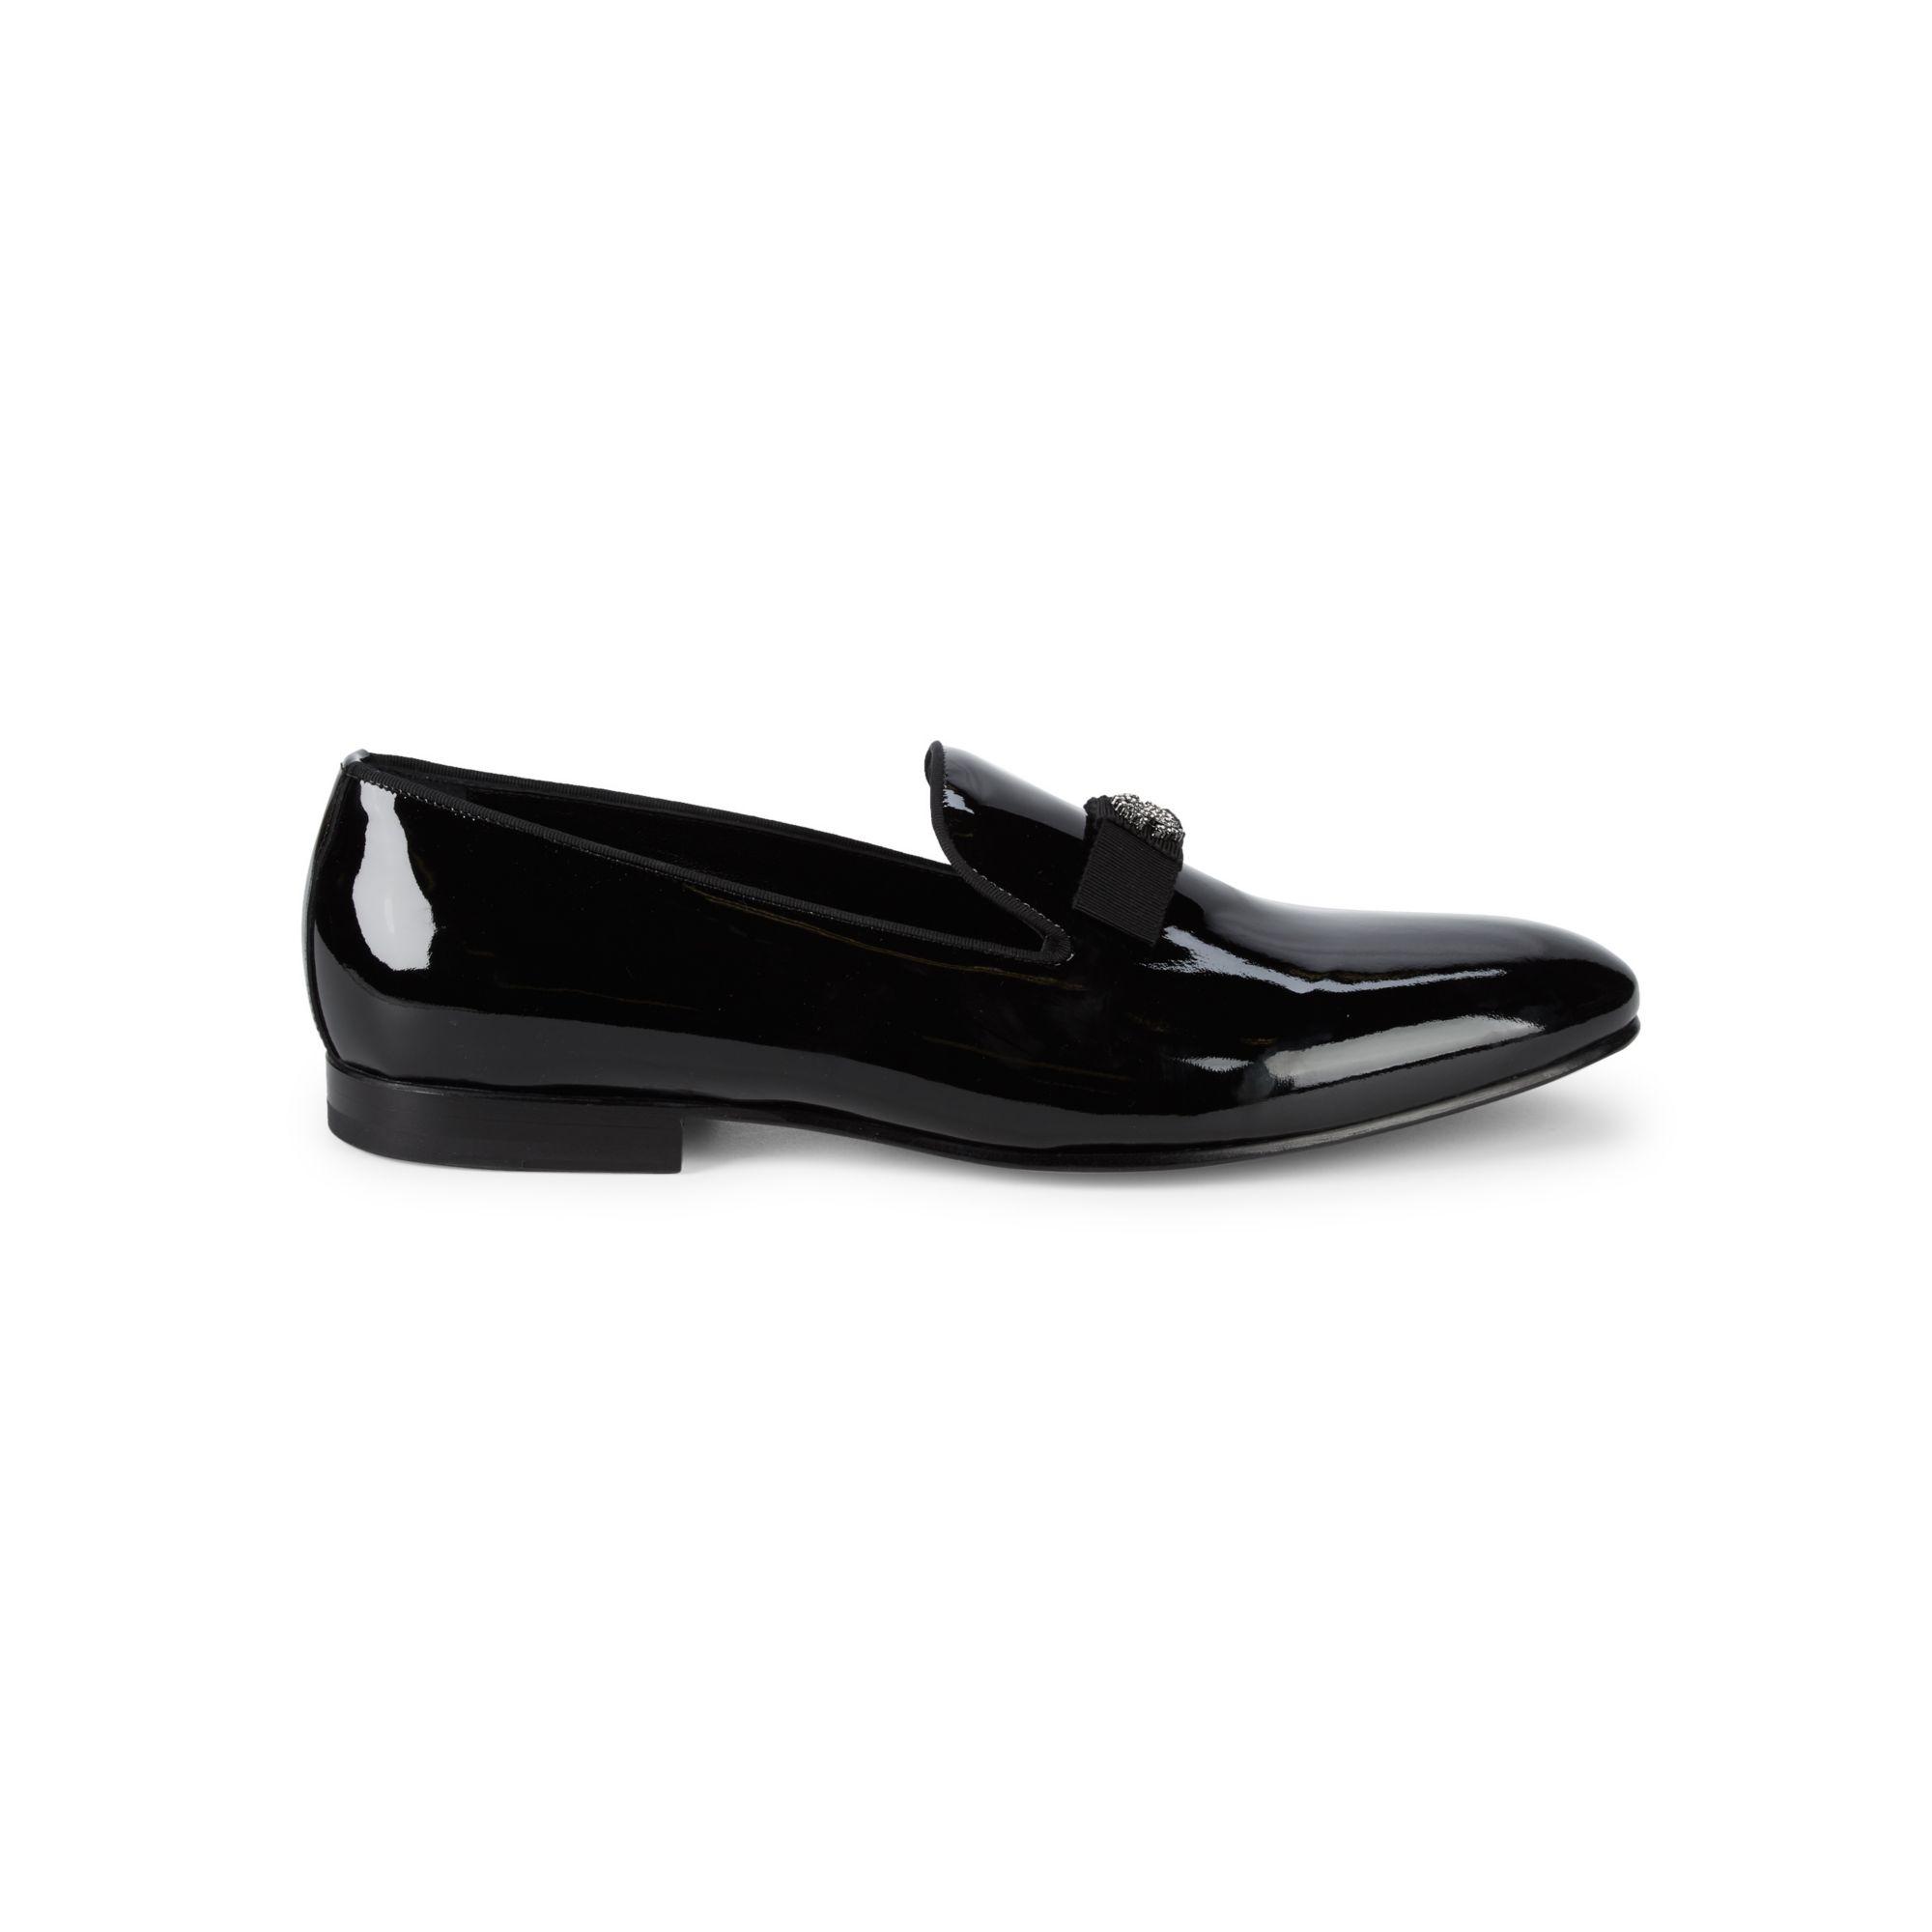 Roberto Cavalli Bow Patent Leather Loafers in Black for Men - Lyst